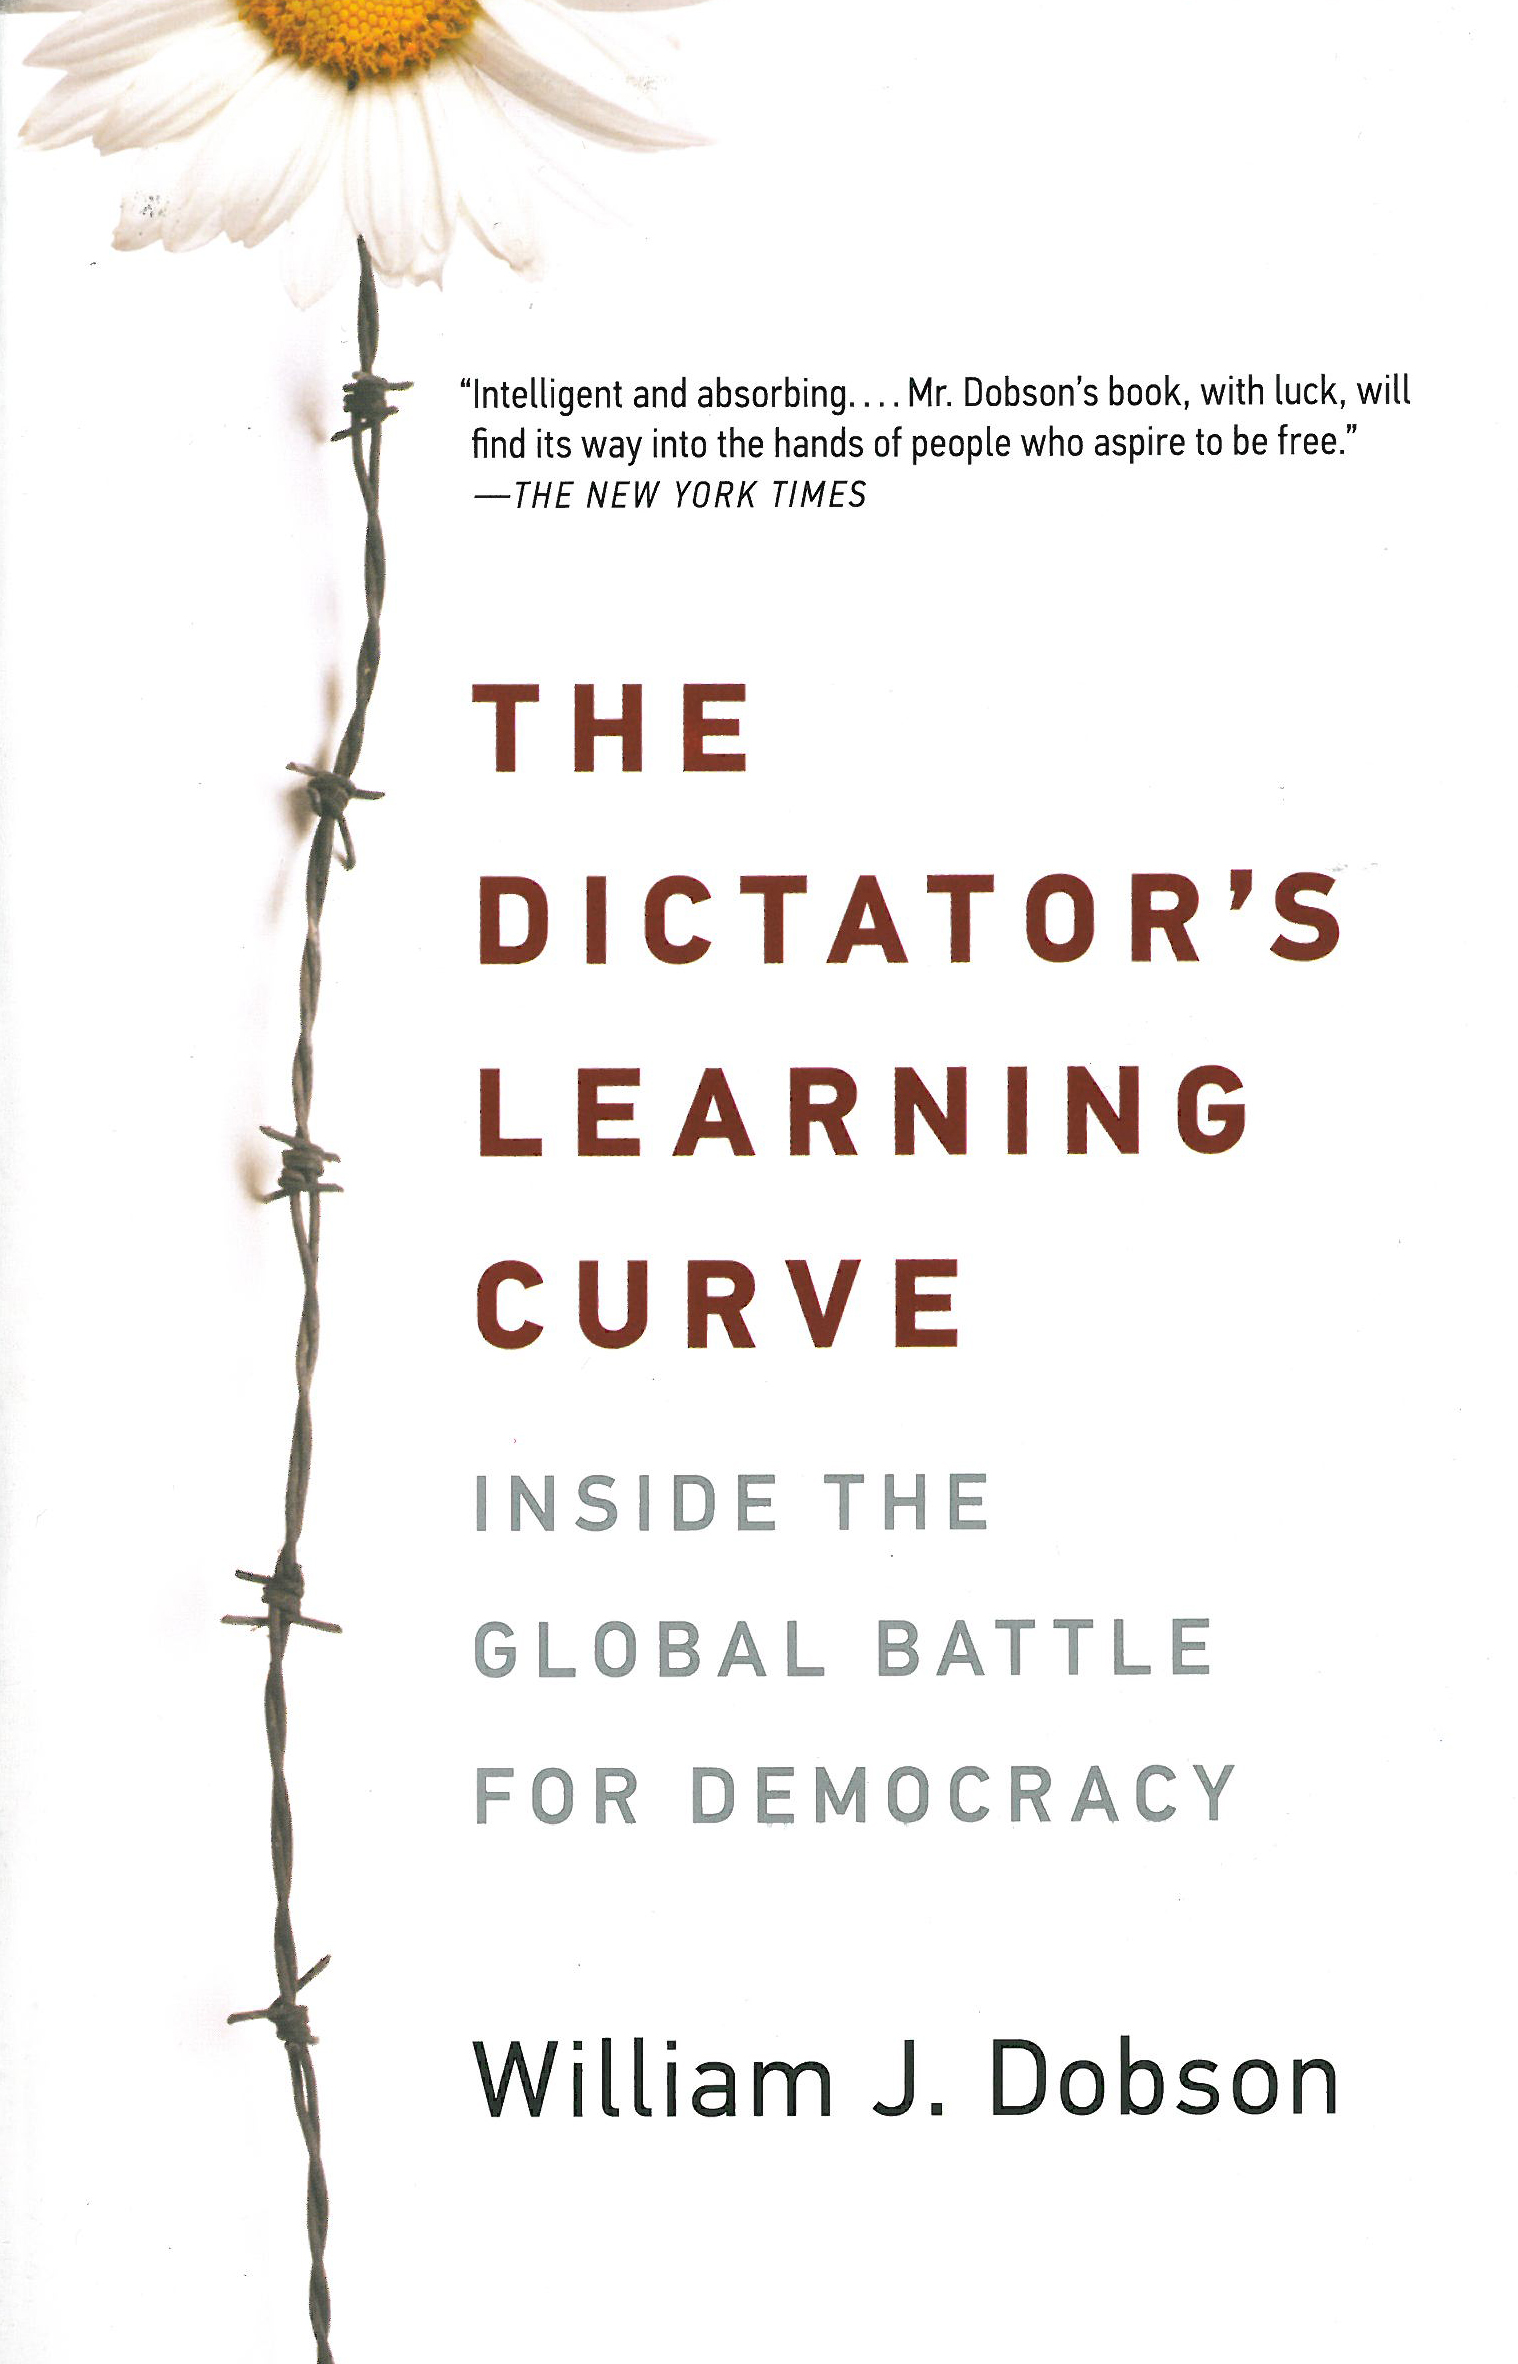 William Dobson: The Dictator’s Learning Curve. Inside the Global Battle for Democracy. Anchor 2013, 352 s.